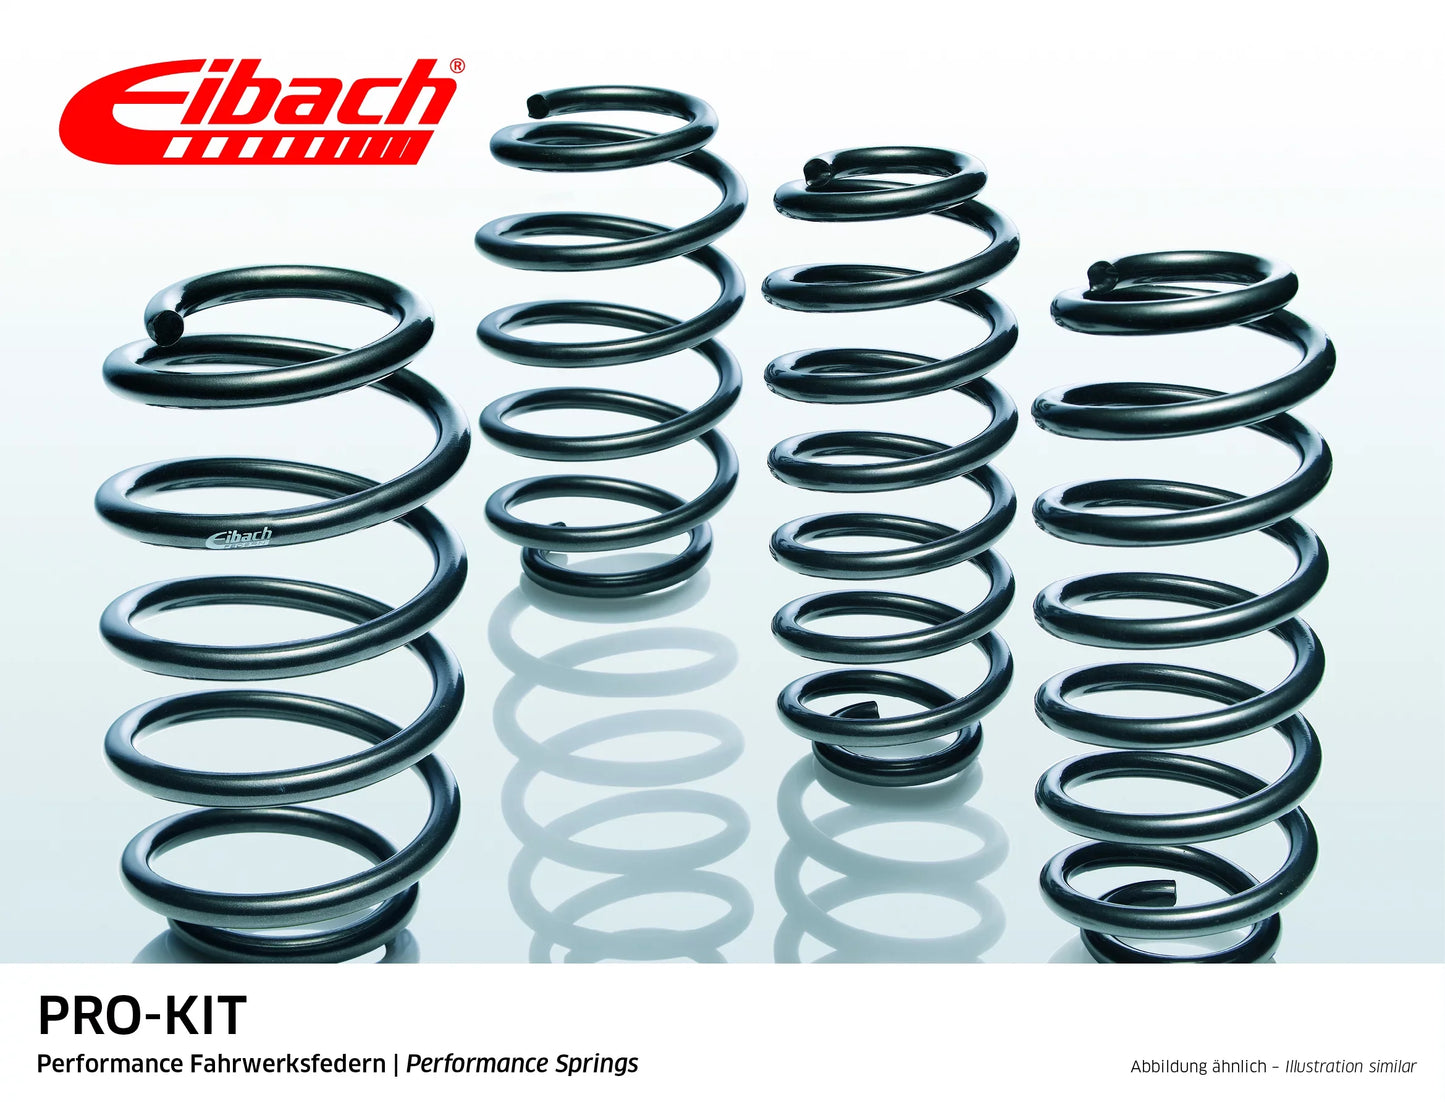 Eibach Pro-Kit Lowering Springs (E1515-140) at £328.13